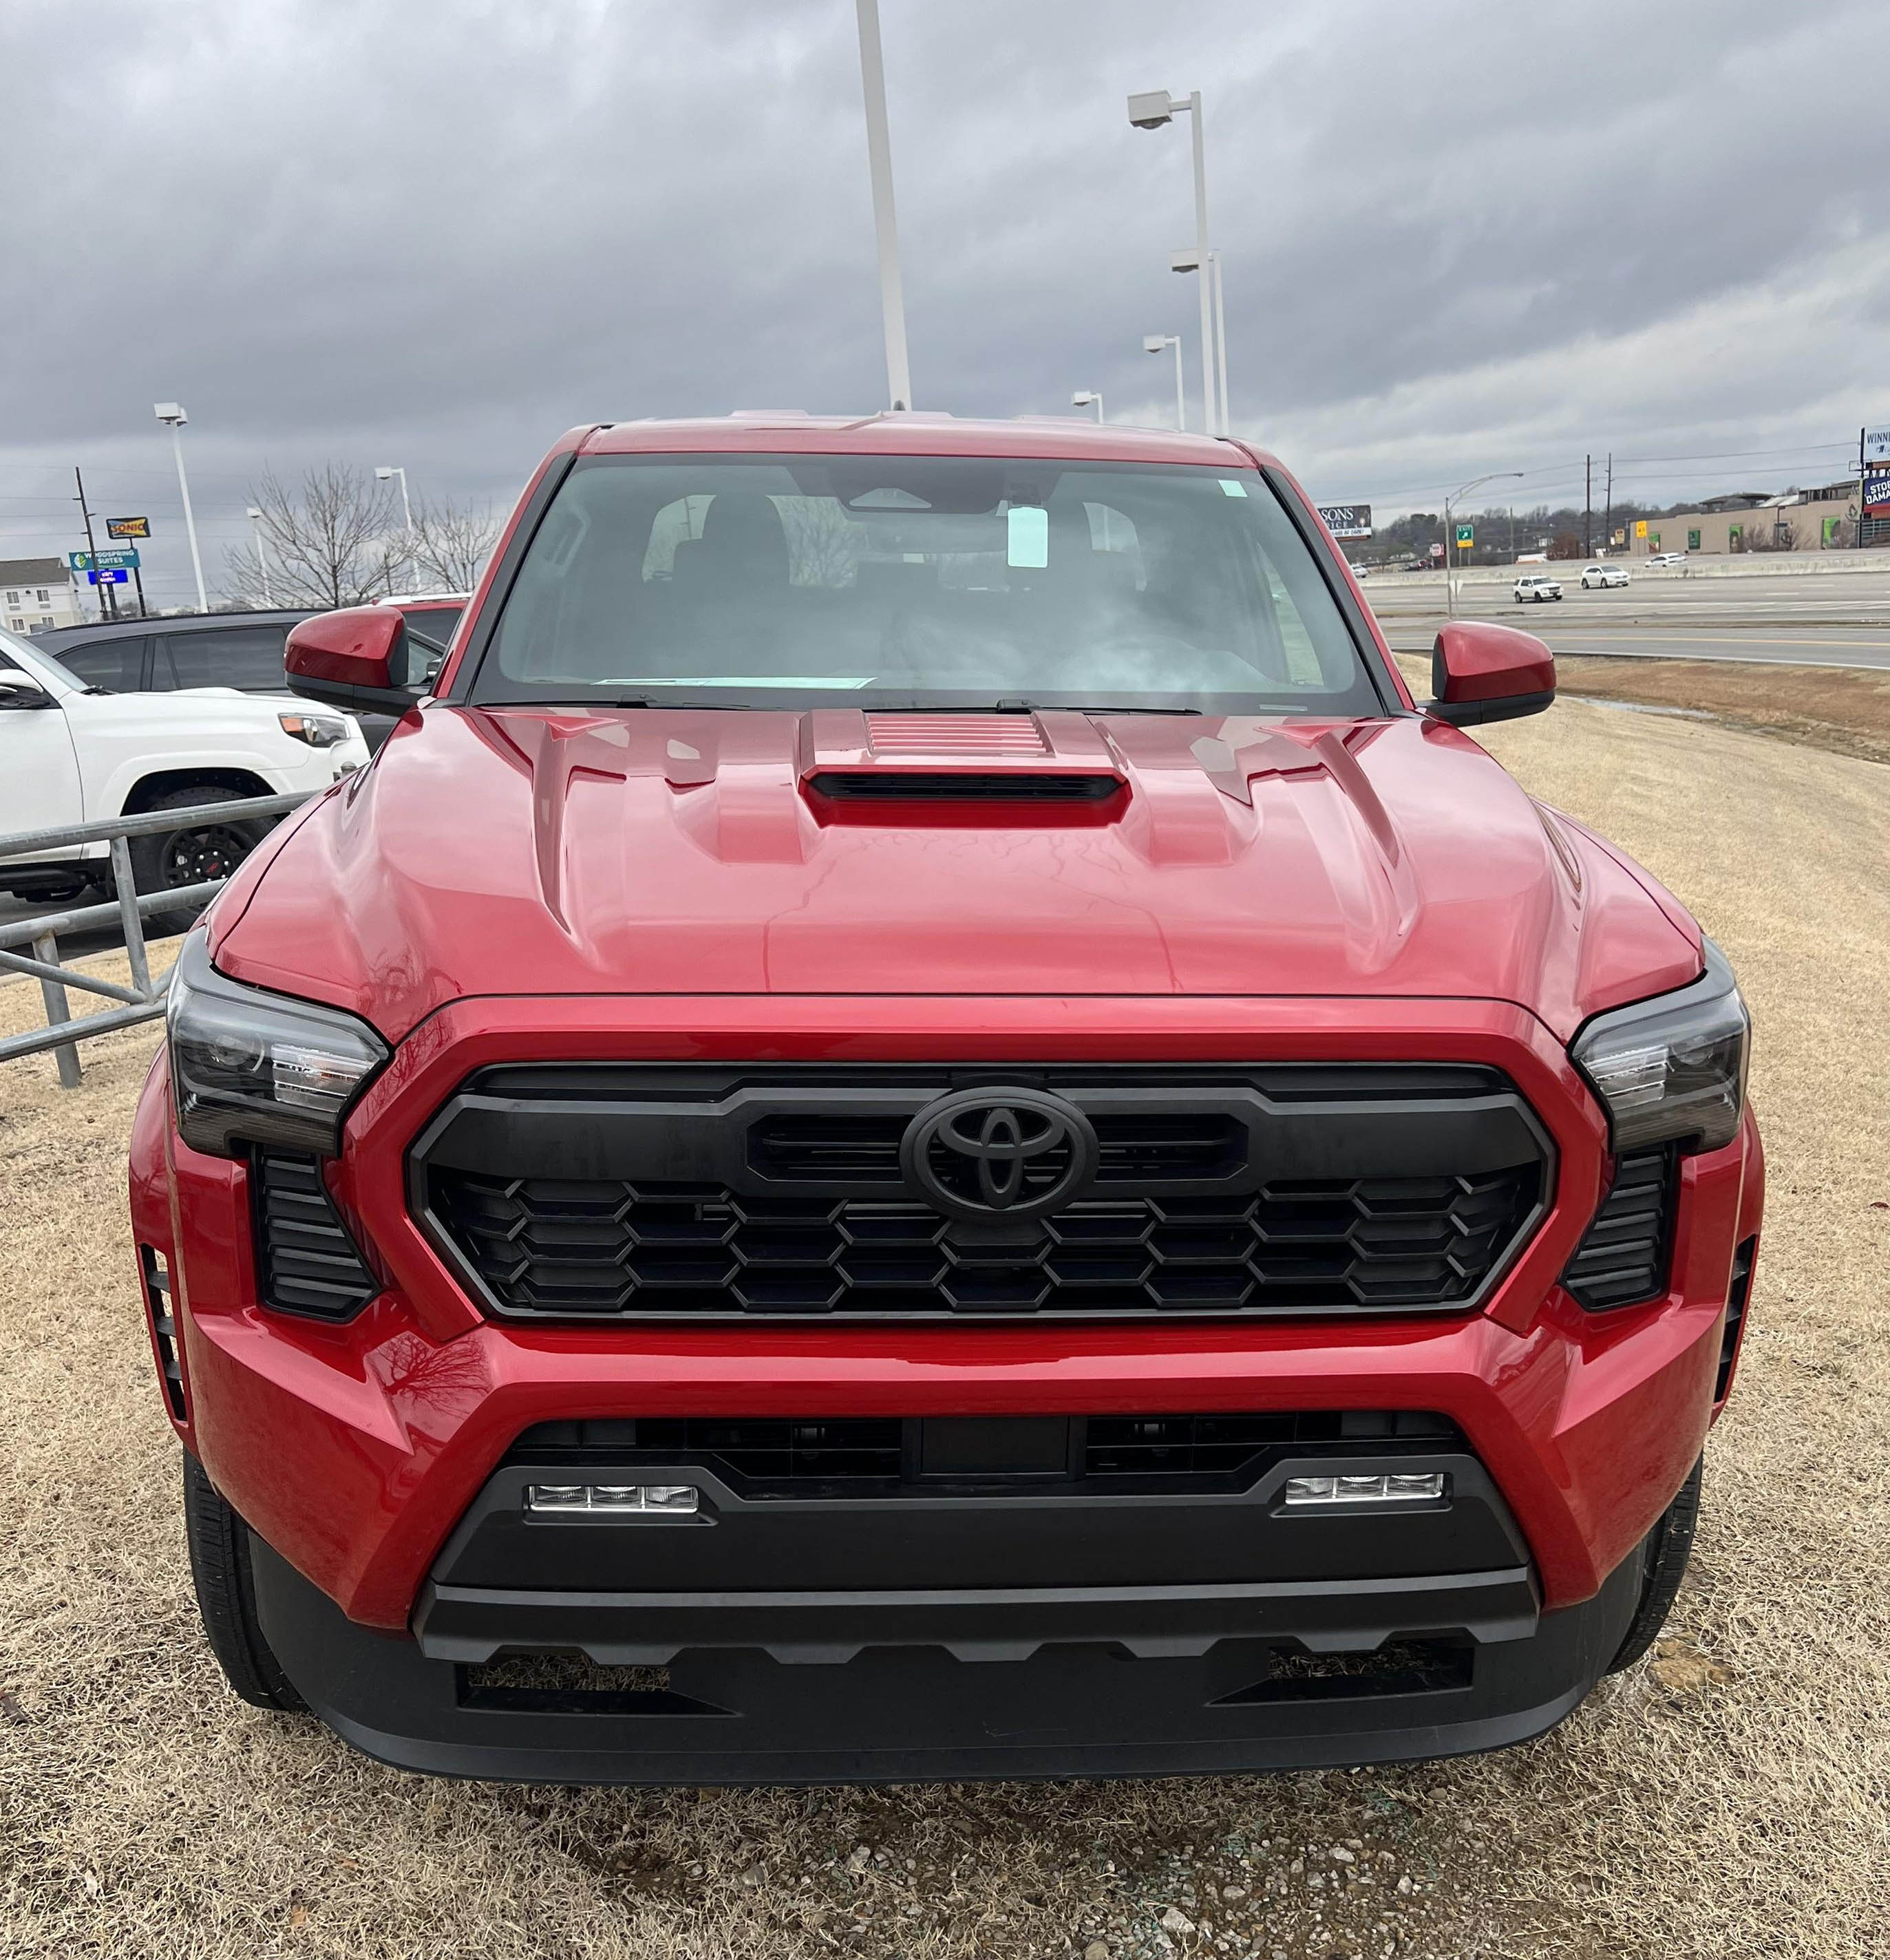 2024 Tacoma Official SUPERSONIC RED 2024 Tacoma Thread (4th Gen) acoma-trd-sport-double-cab-in-supersonic-red-6-